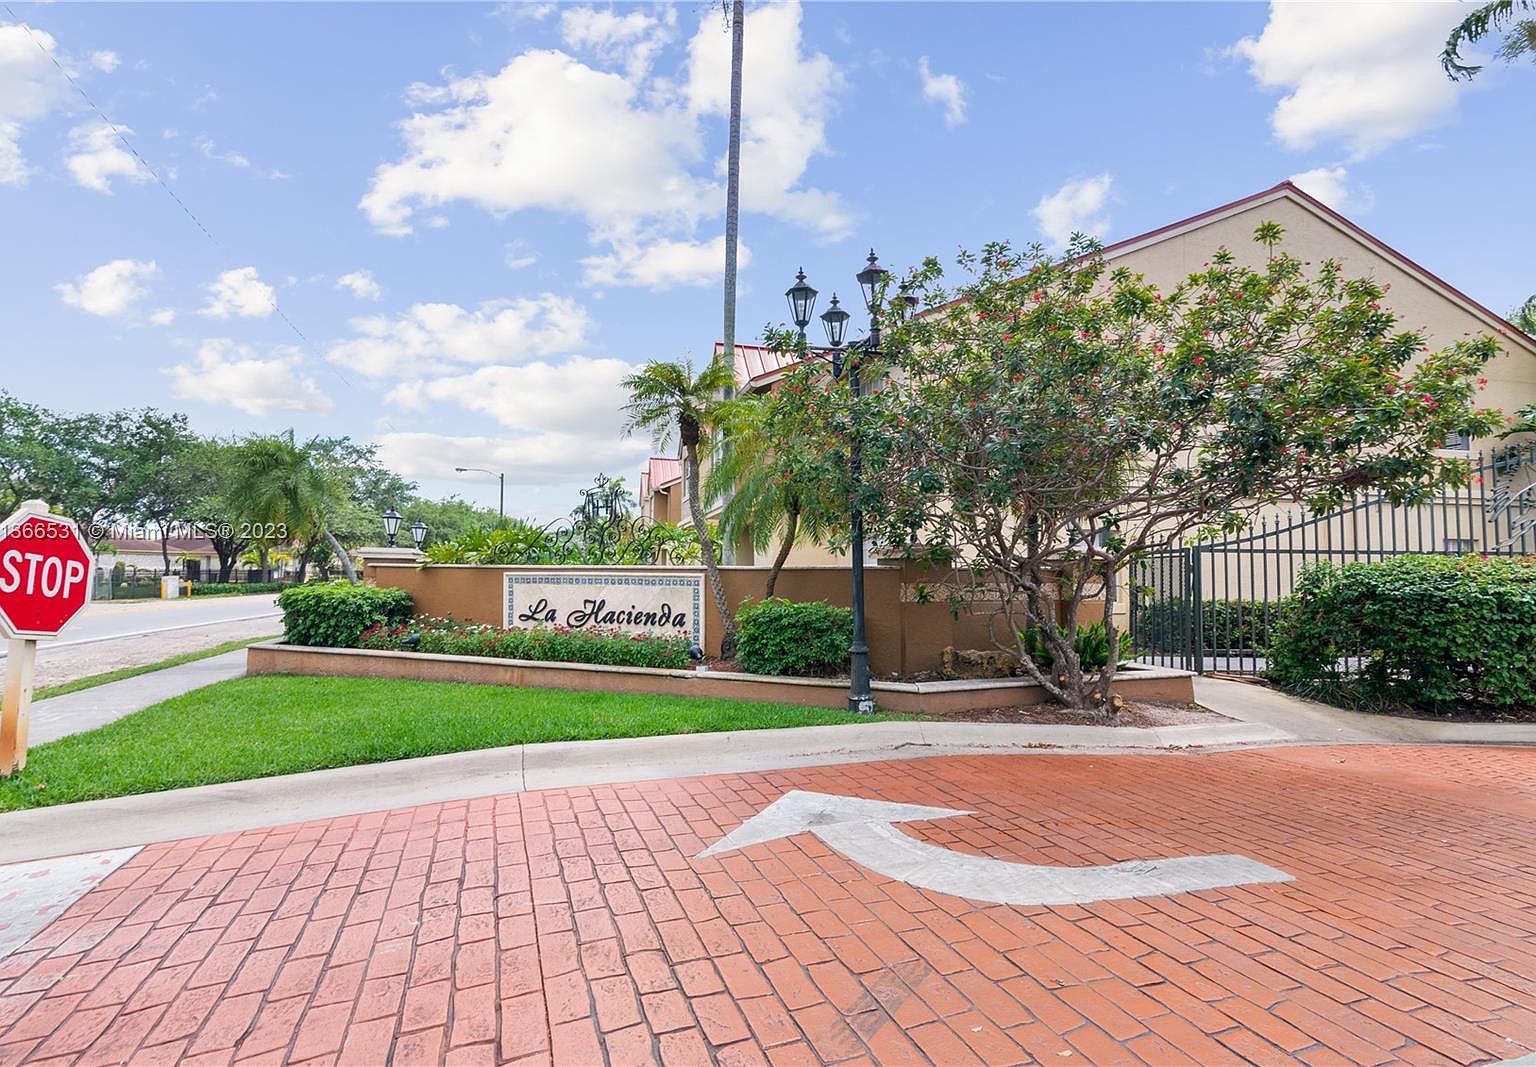 18348 NW 68th Ave APT I, Hialeah, FL 33015 | Zillow